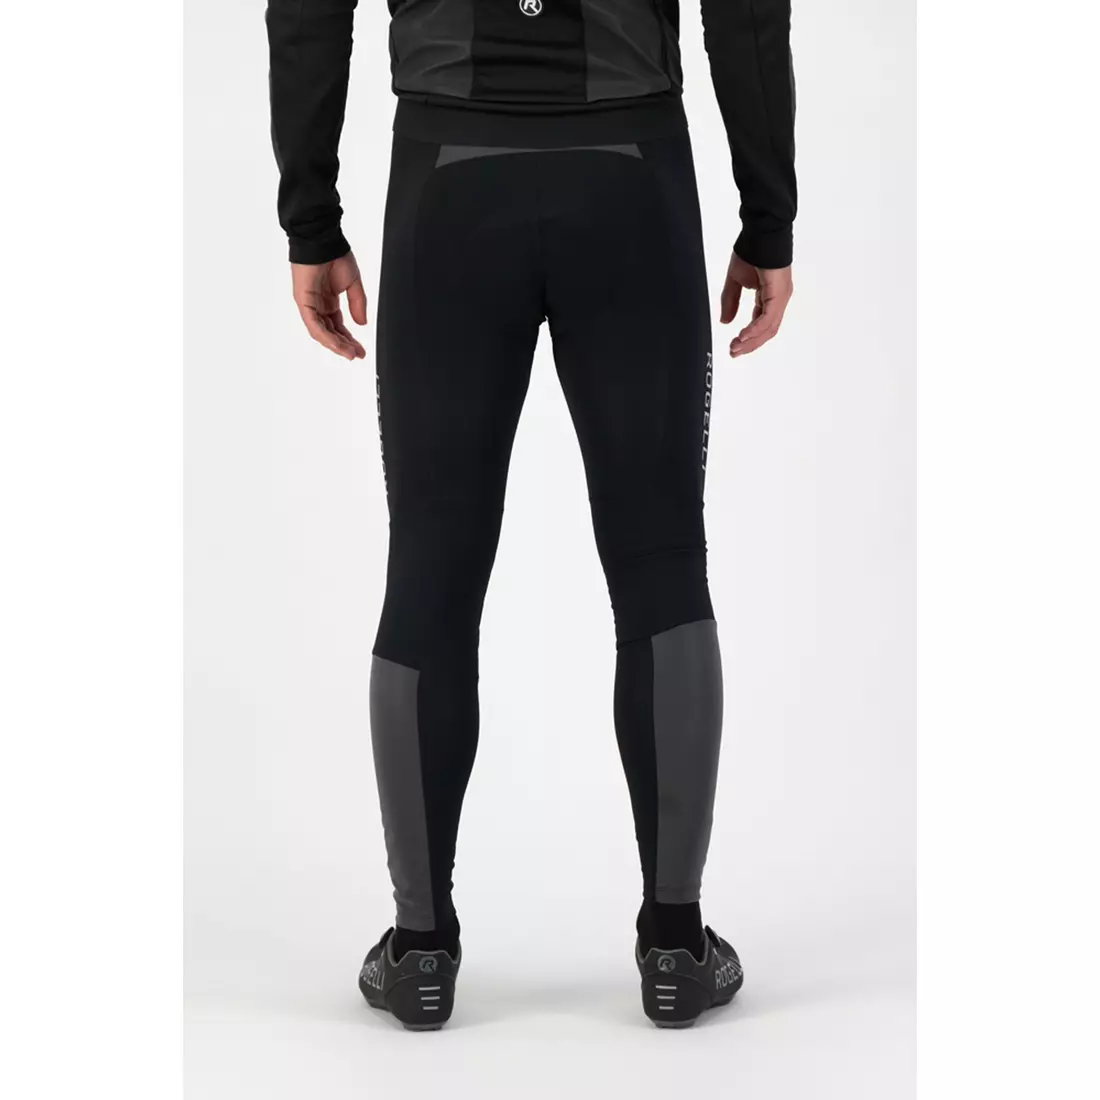 Rogelli Men's insulated cycling trousers with braces ESSENTIAL HI VIS black ROG351016